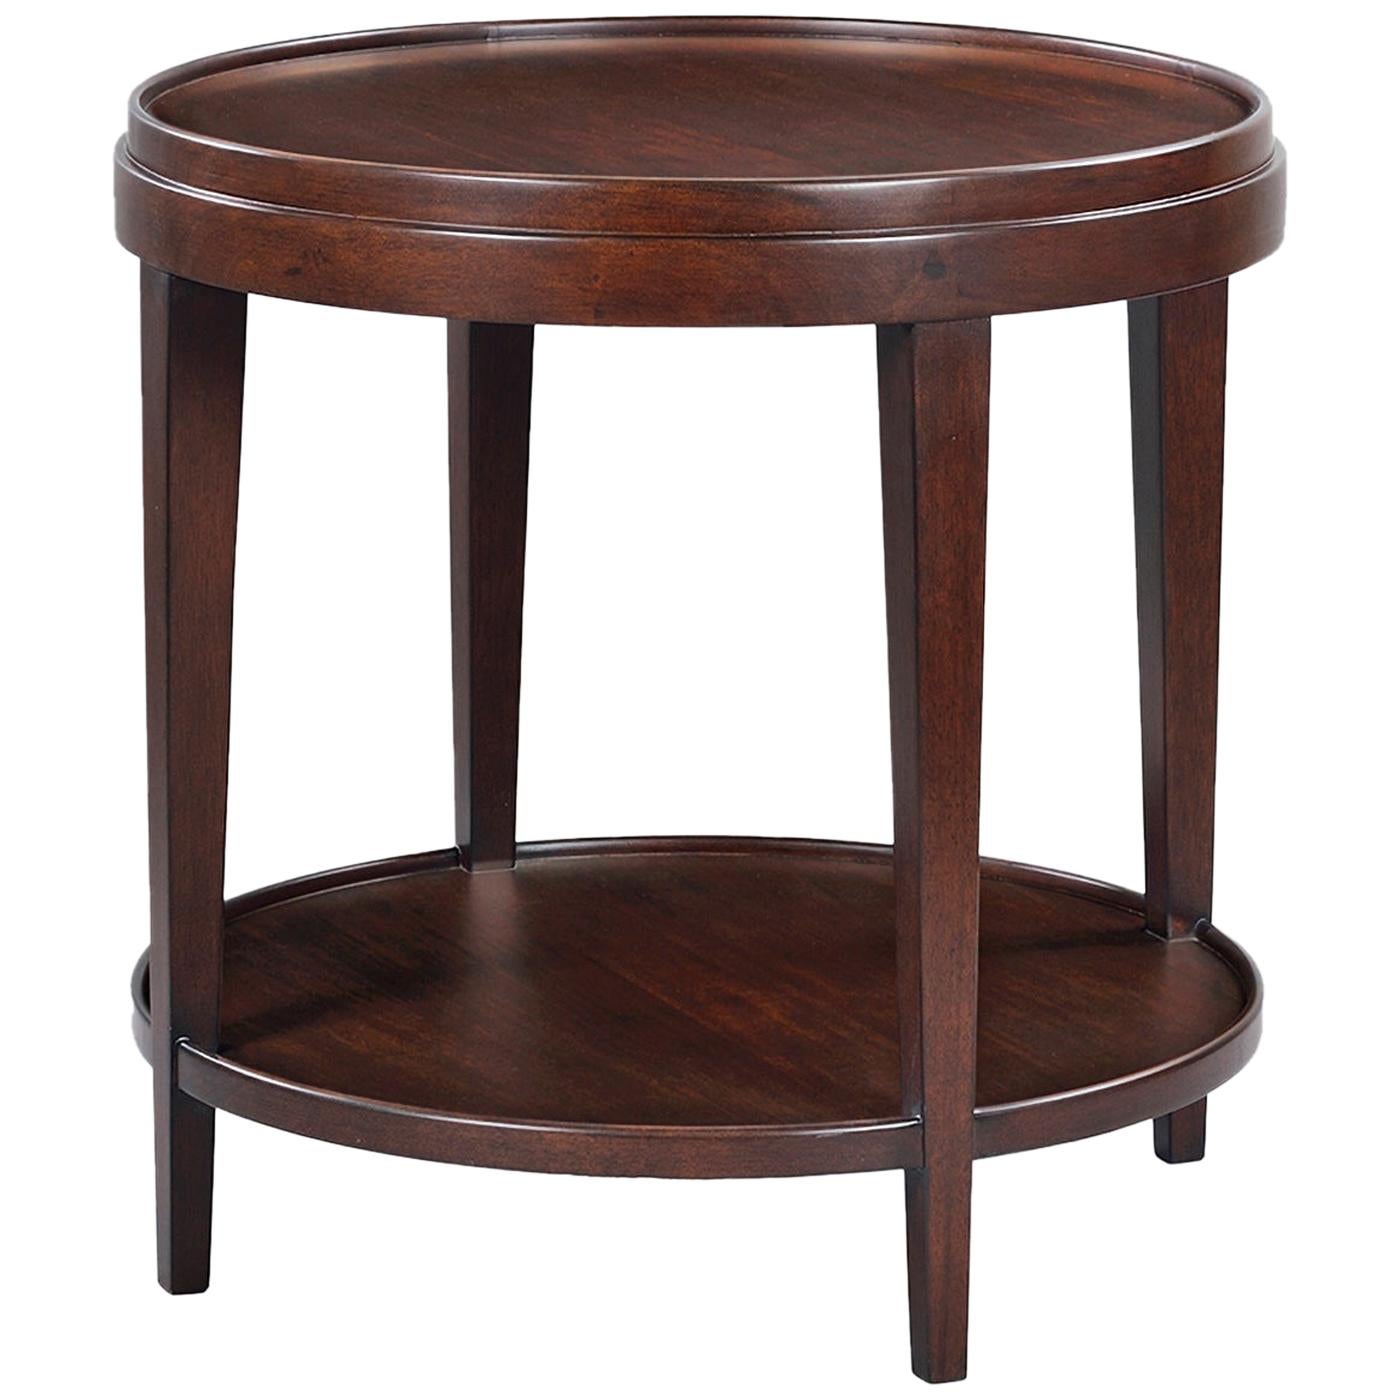 Classic Round End Table, Mahogany Finish For Sale